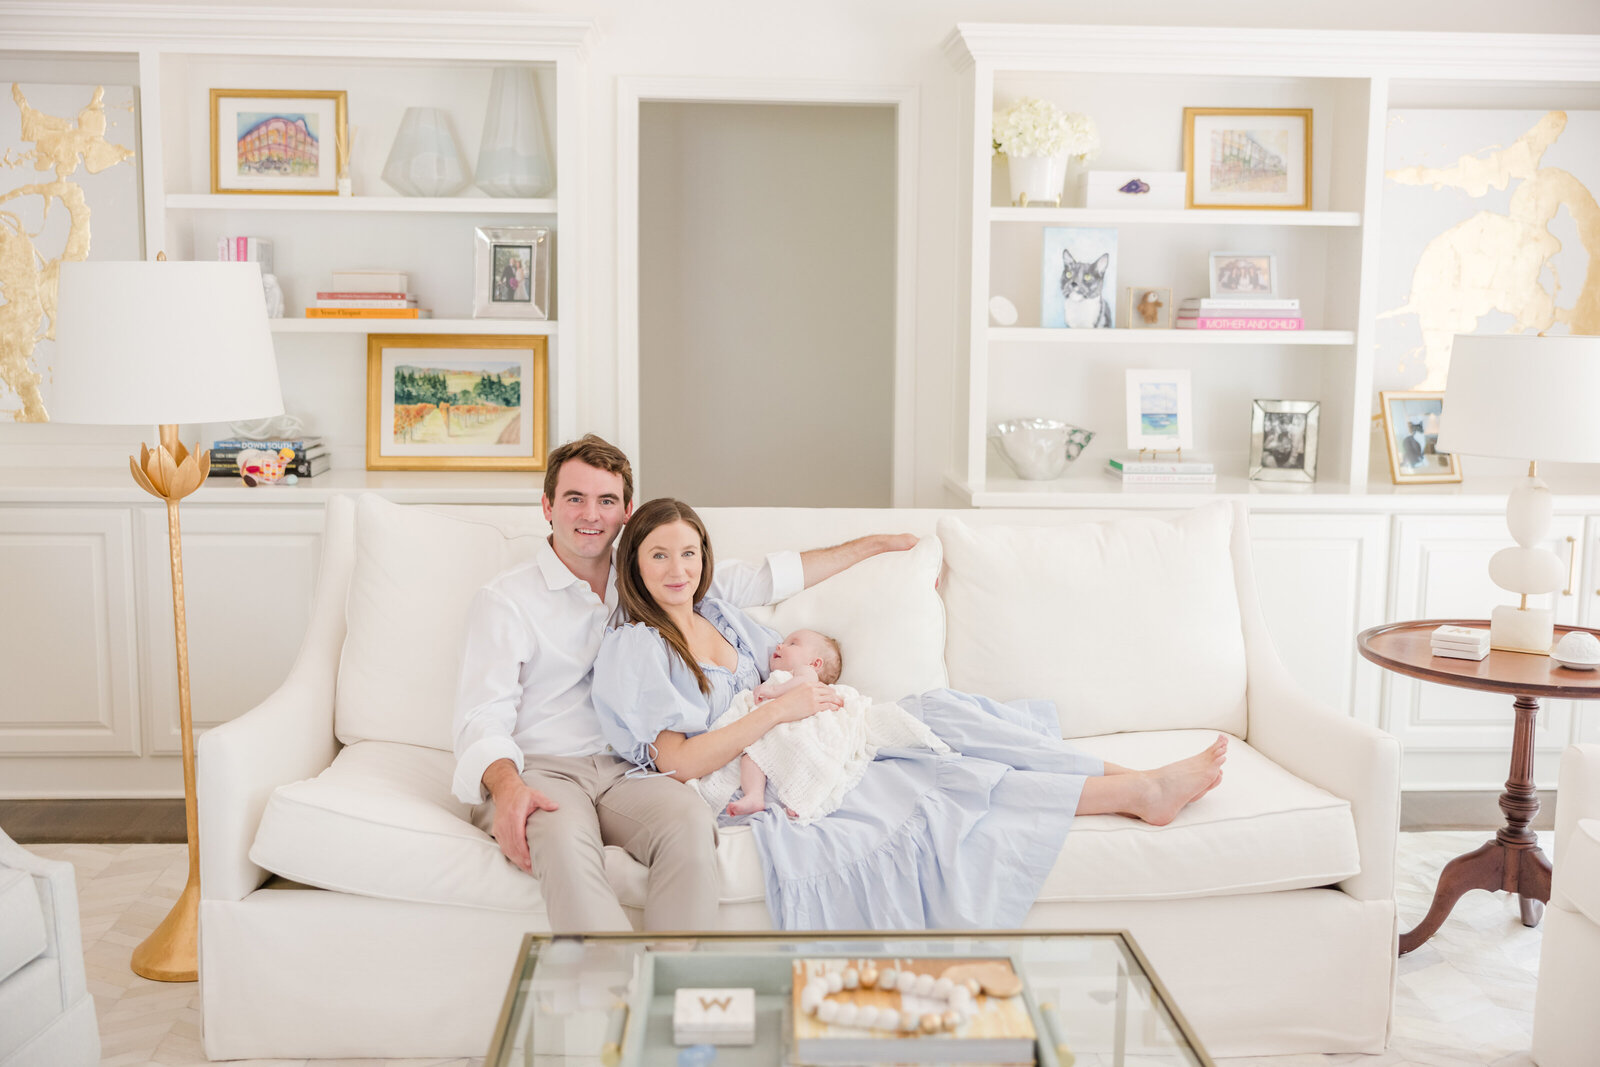 Parents smiling for photos while seated on a couch holding their newborn.